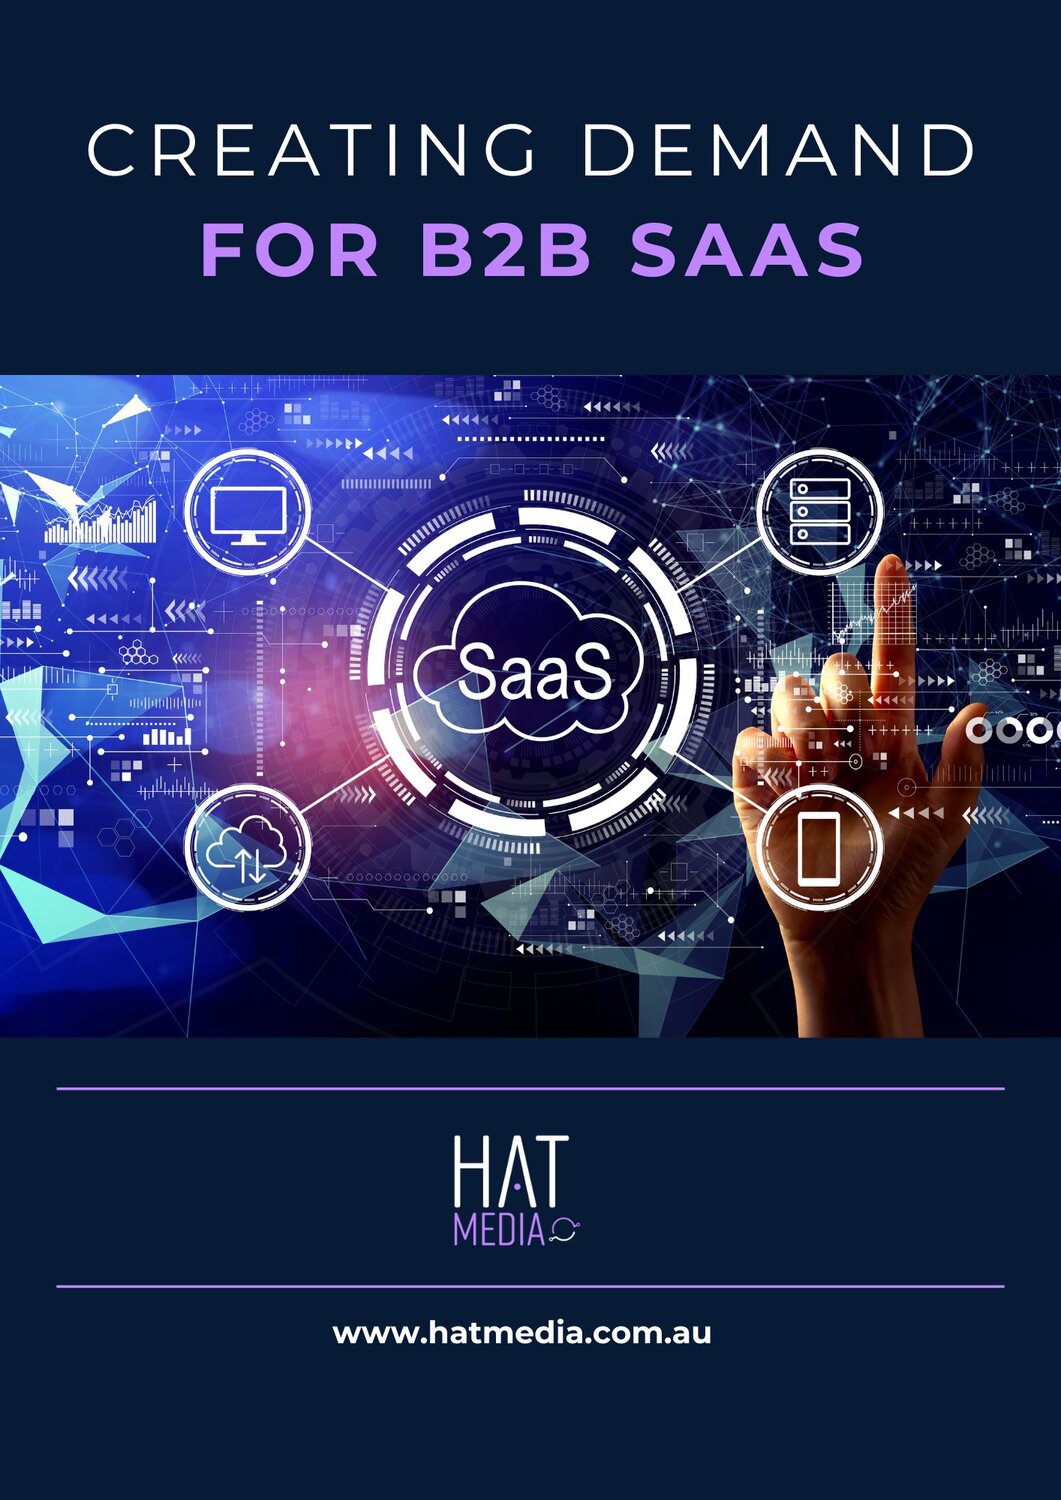 Download the Creating Demand for B2B SaaS Guide